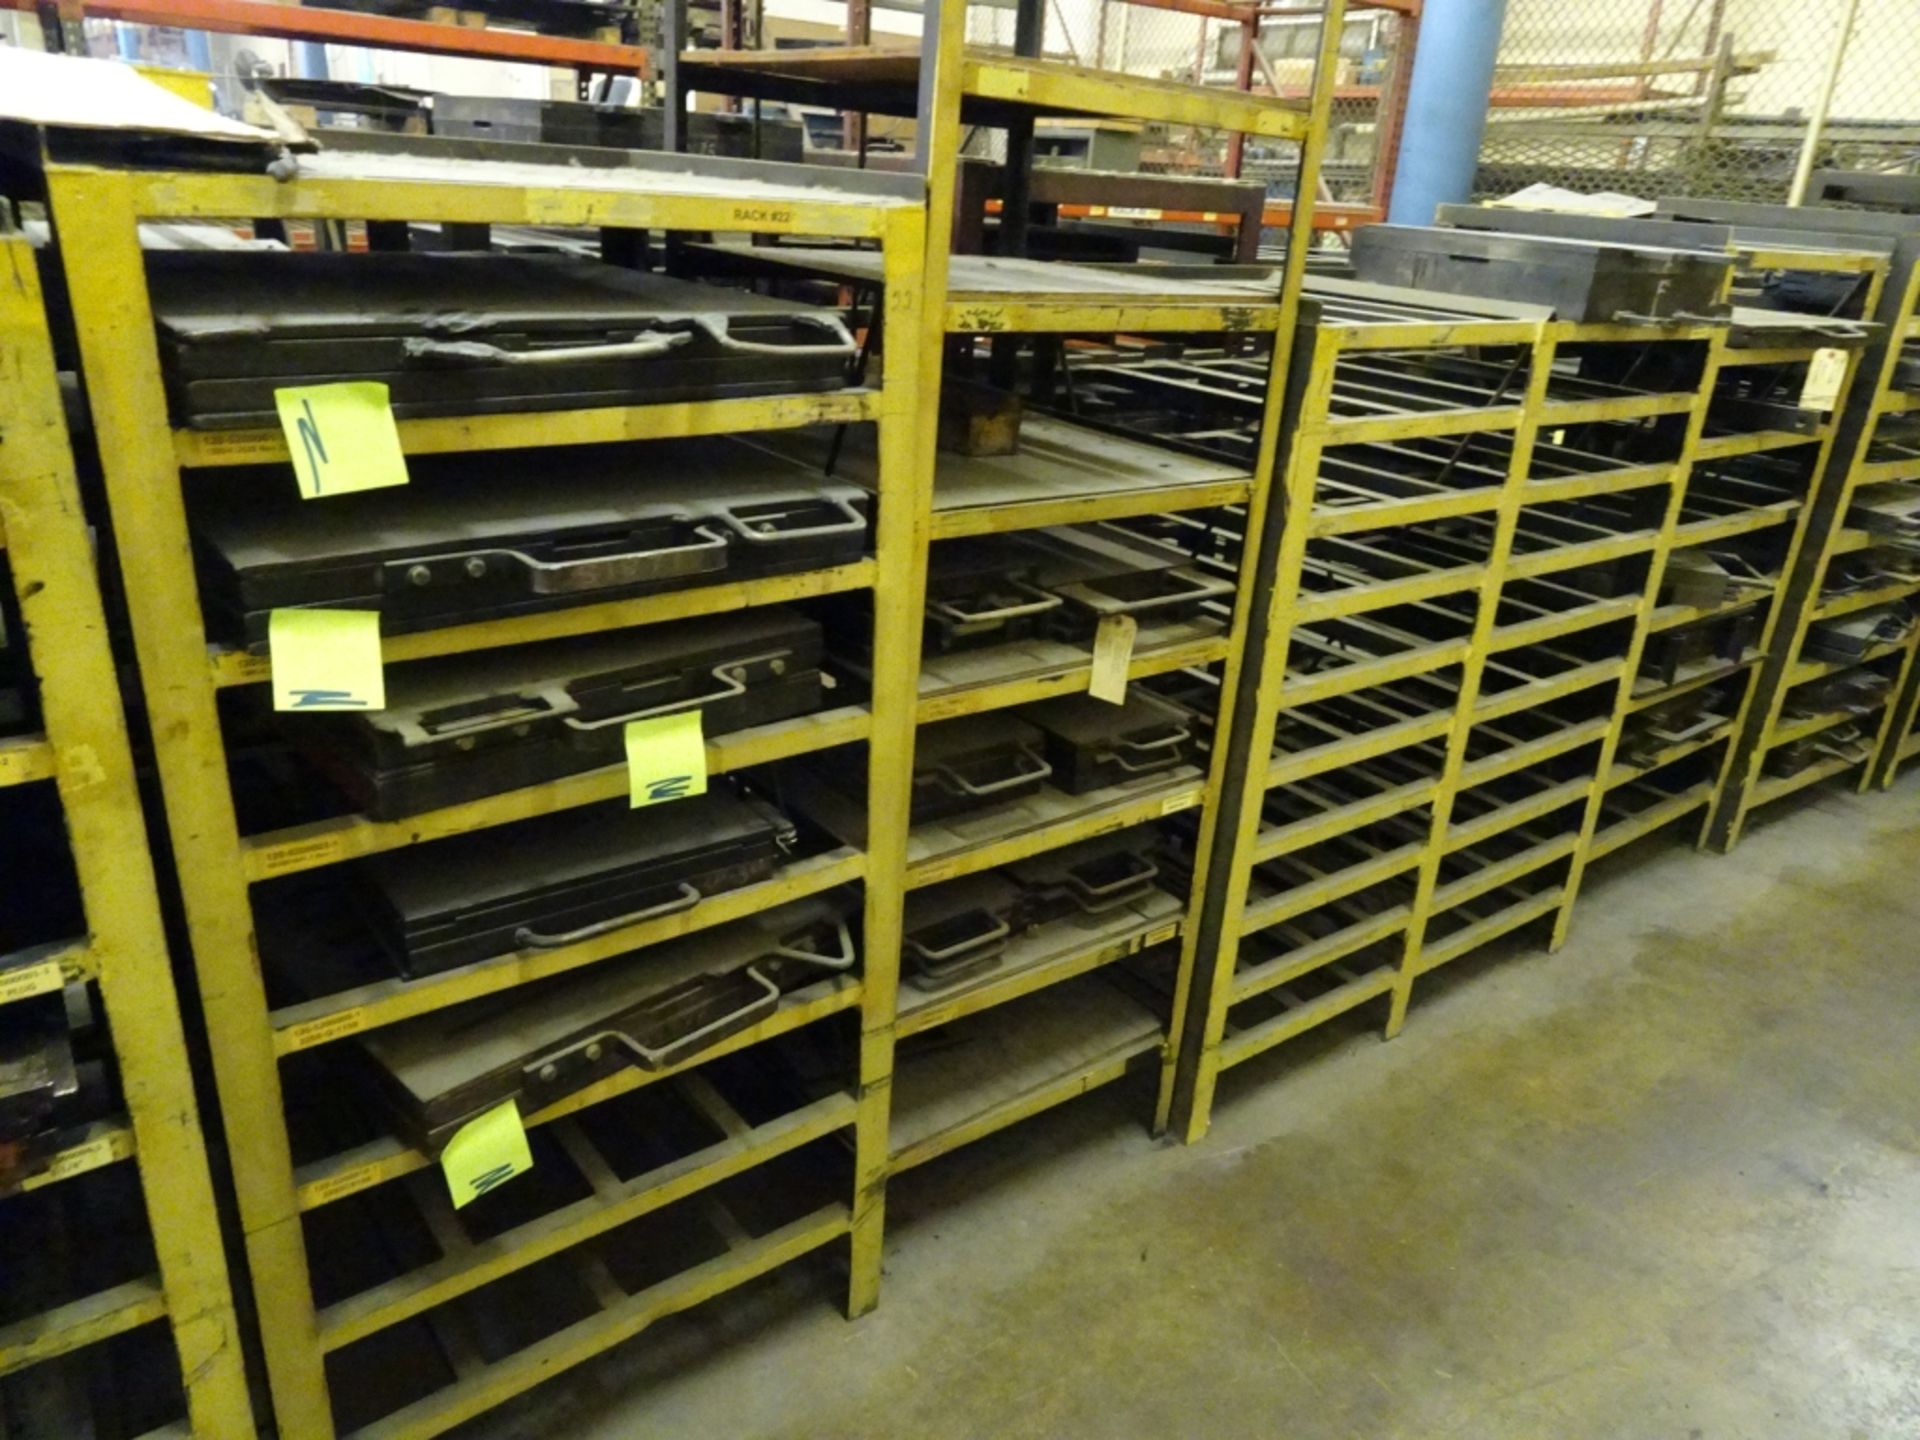 (15) Various Sized Heavy Duty Steel Mold Racks With No Contents - Image 5 of 5